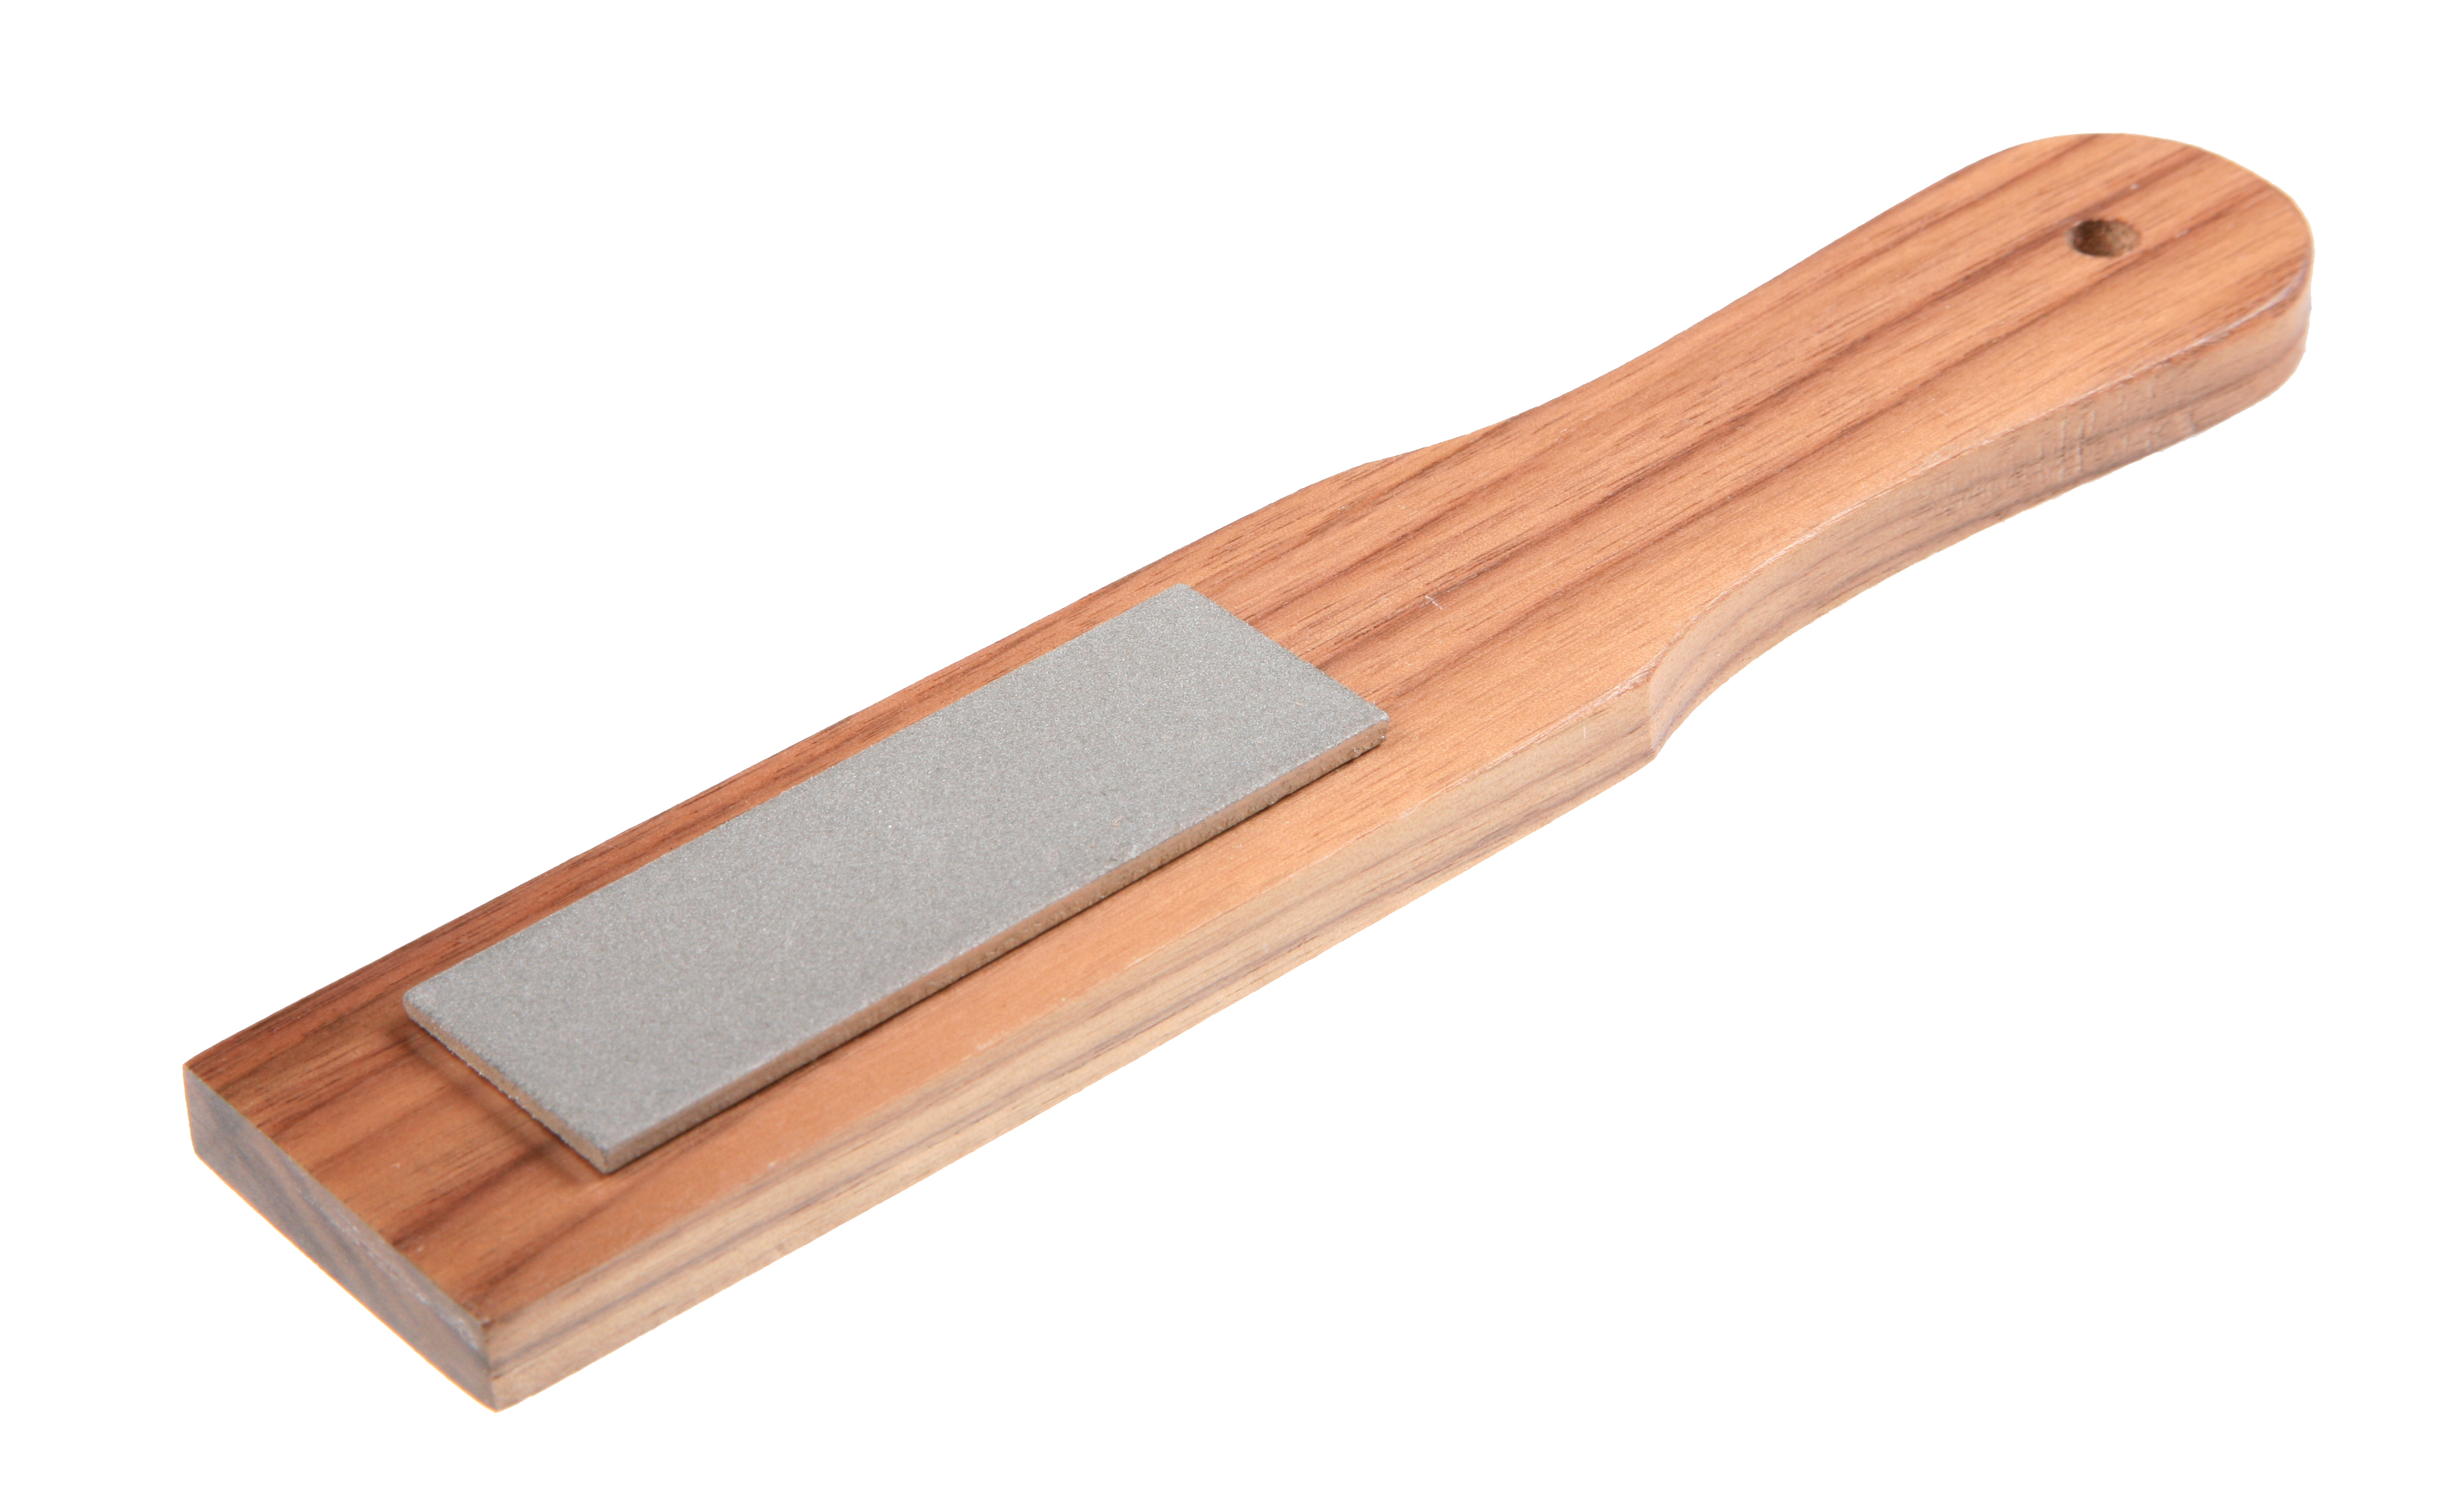 One side is super Eze-Lap Double Sided Sharpening Stone CD4 Measures 4" x 3/4" 